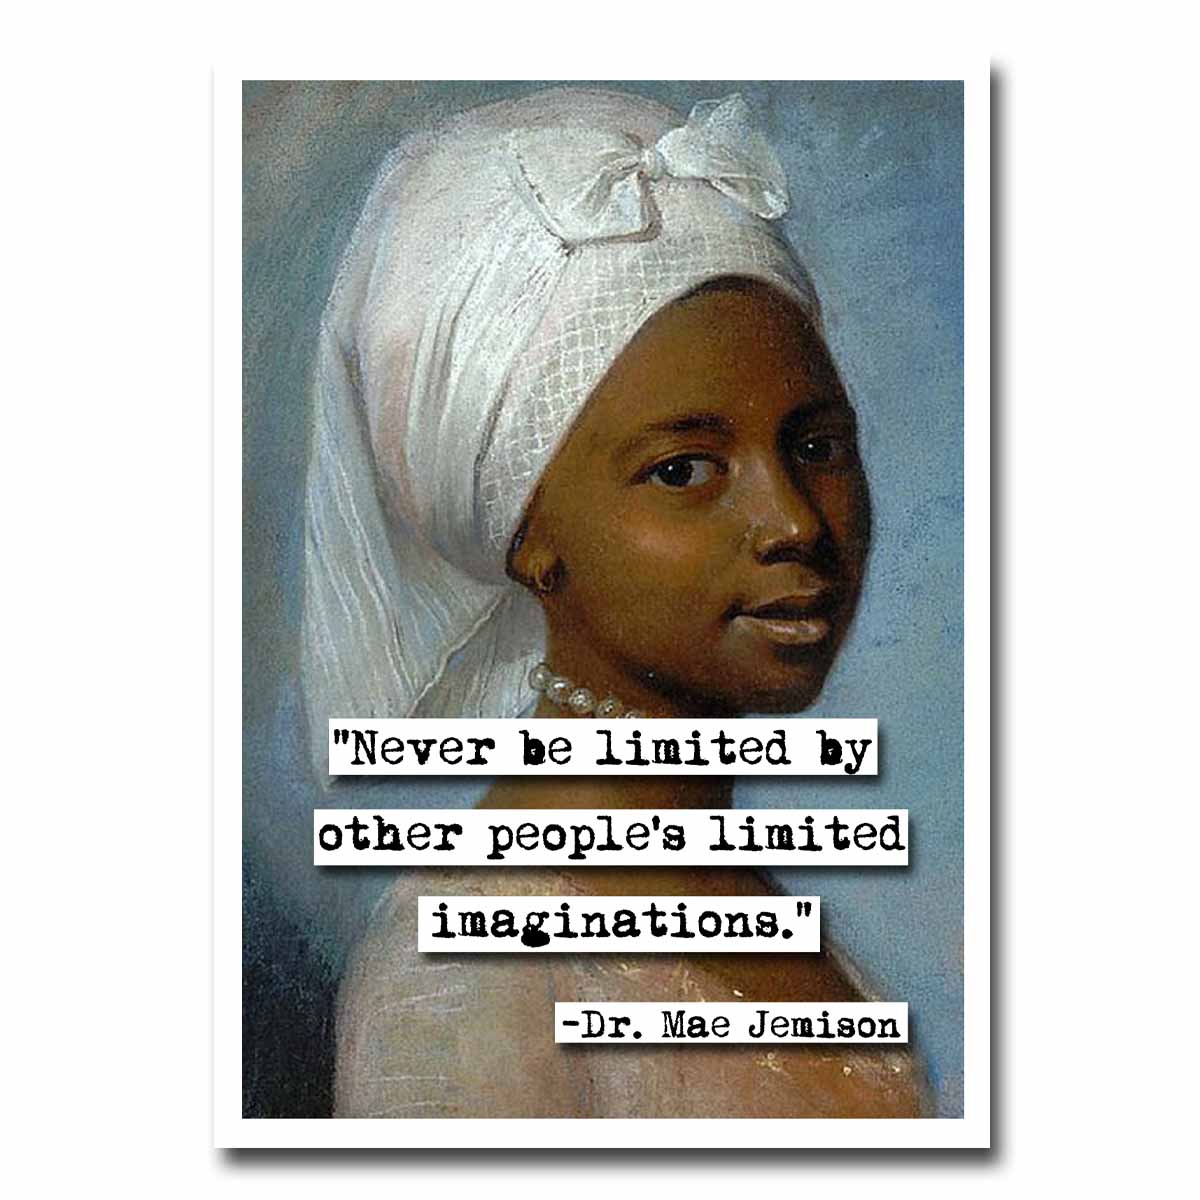 Dr. Mae Jemison Imagination Quote Blank Greeting Card